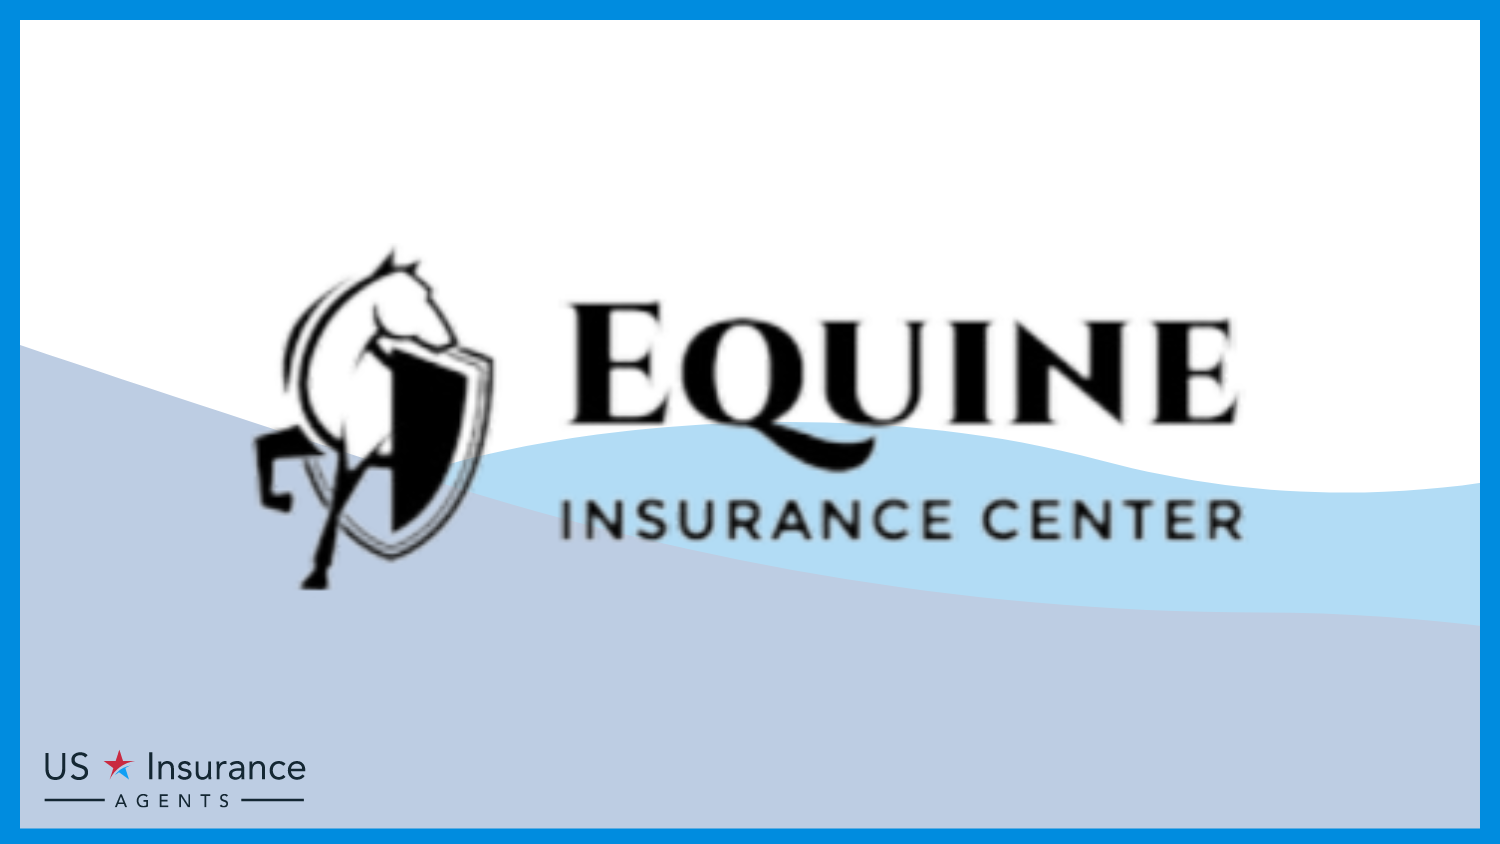 Equine: Best Business Insurance for Equine Therapy